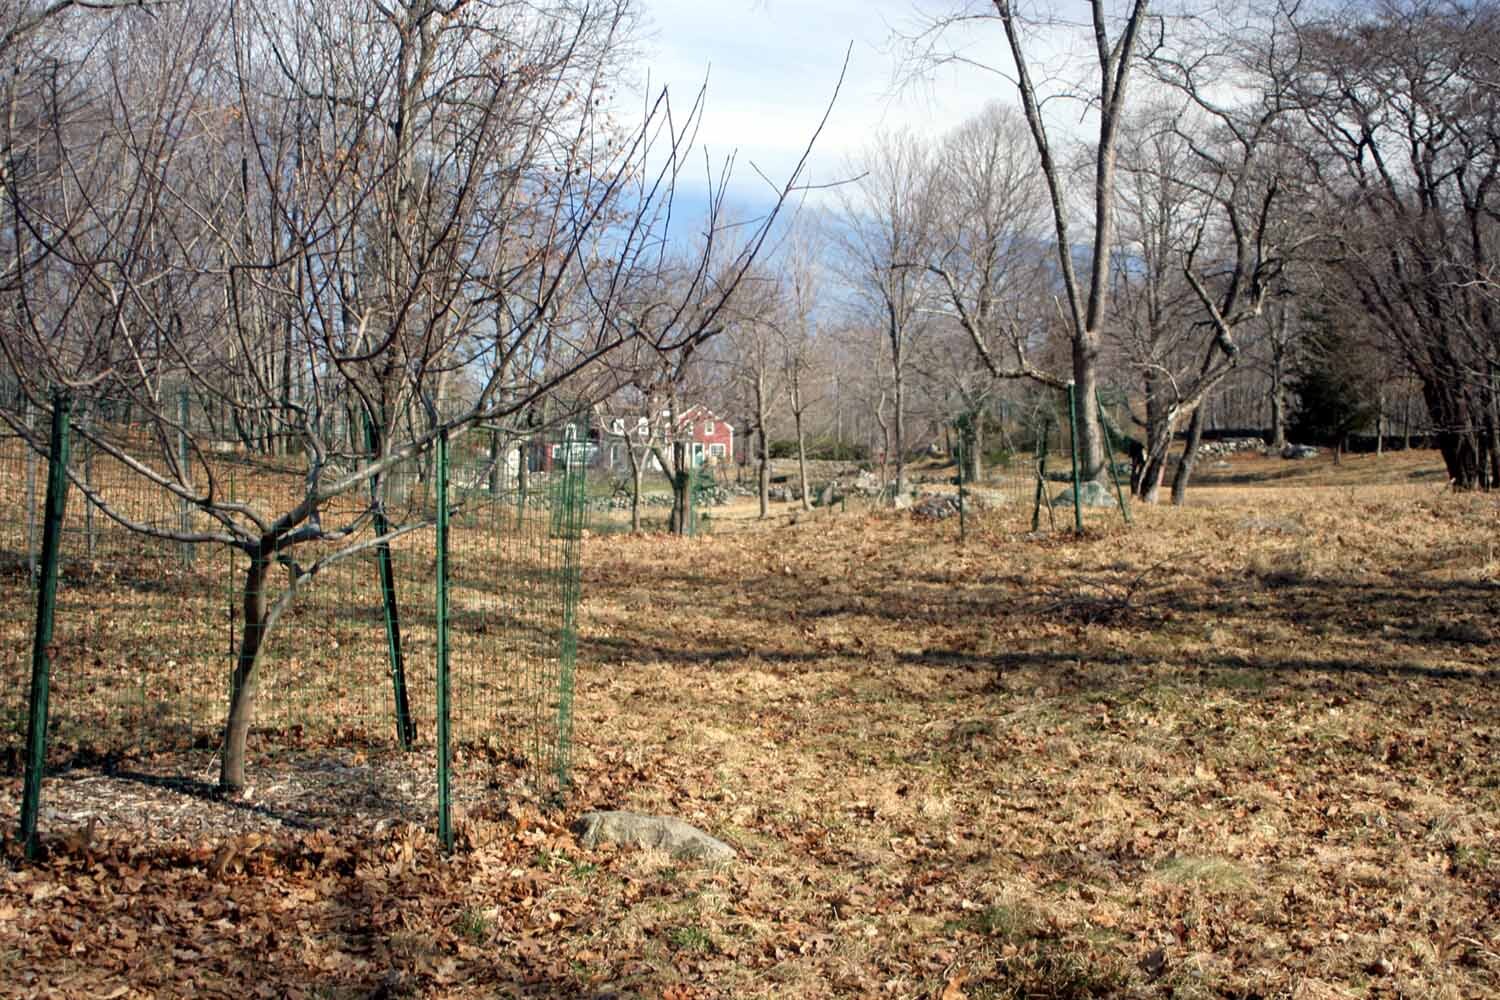 A cluster of leafless fruit tree grow in an open agricultural area. Their trunks are surrounded by protective fence and a house, stone walls, and wooded areas are visible in the background.